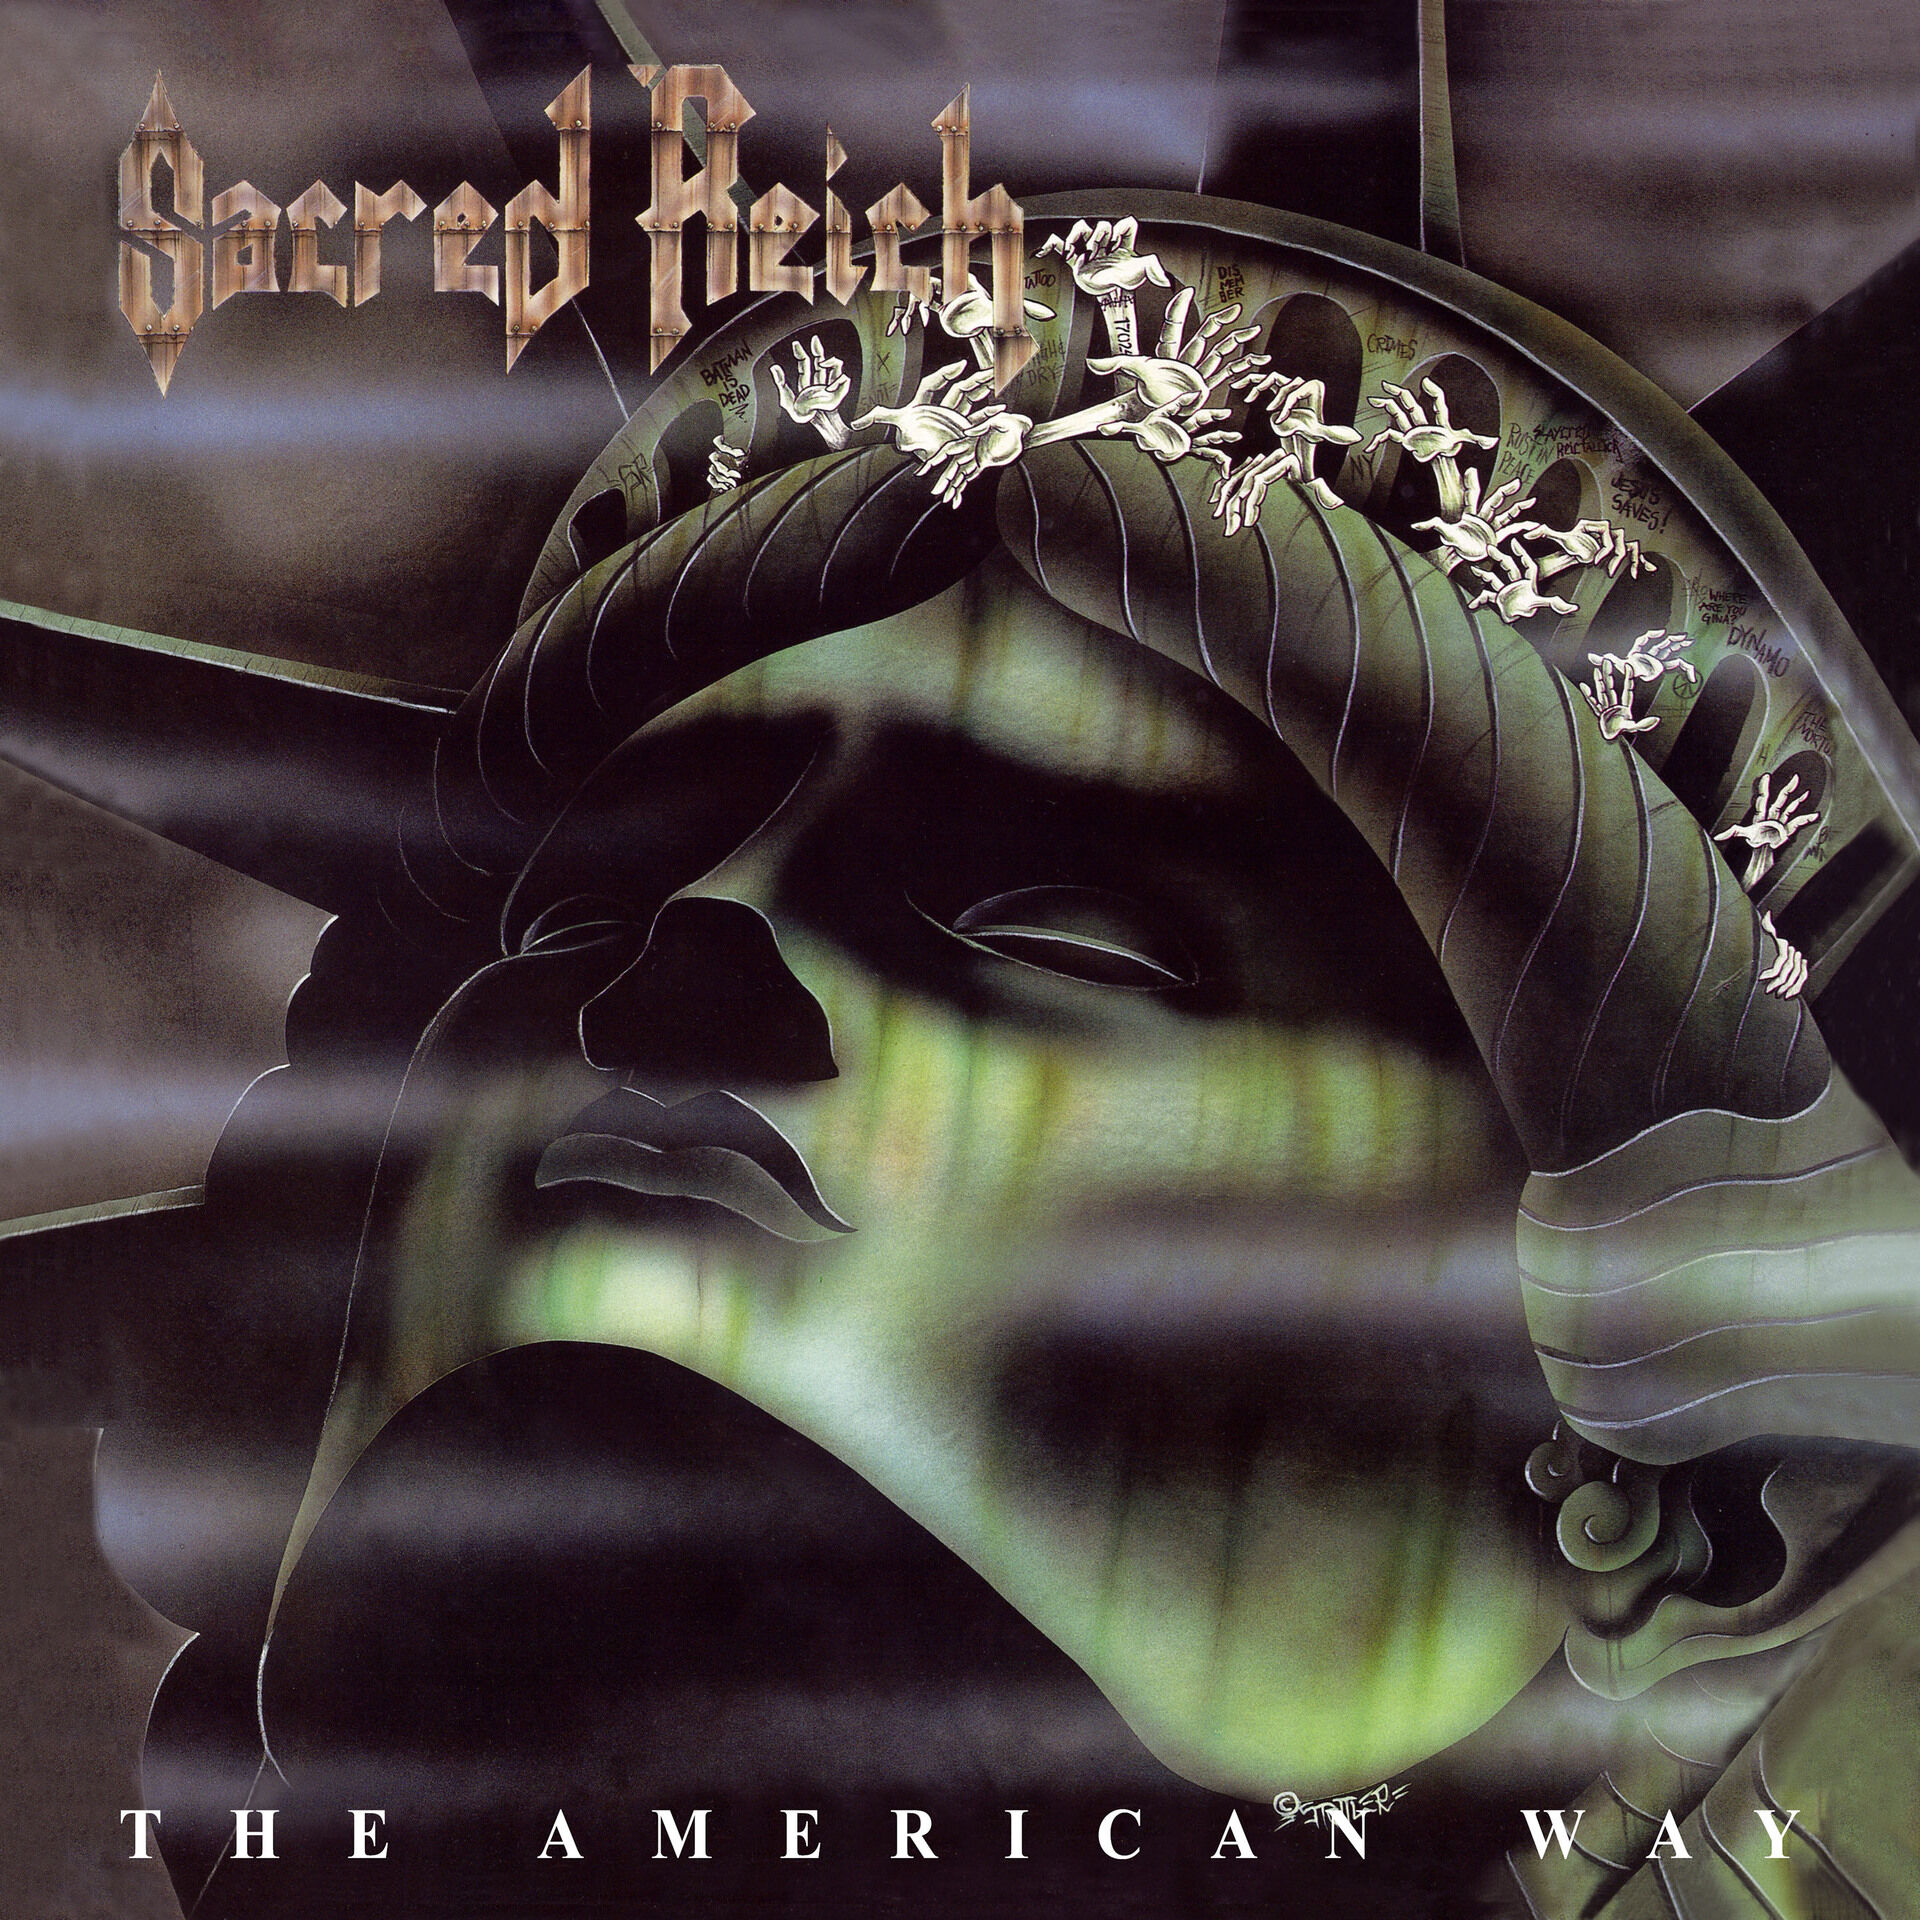 SACRED REICH - The American Way [BLACK LP]